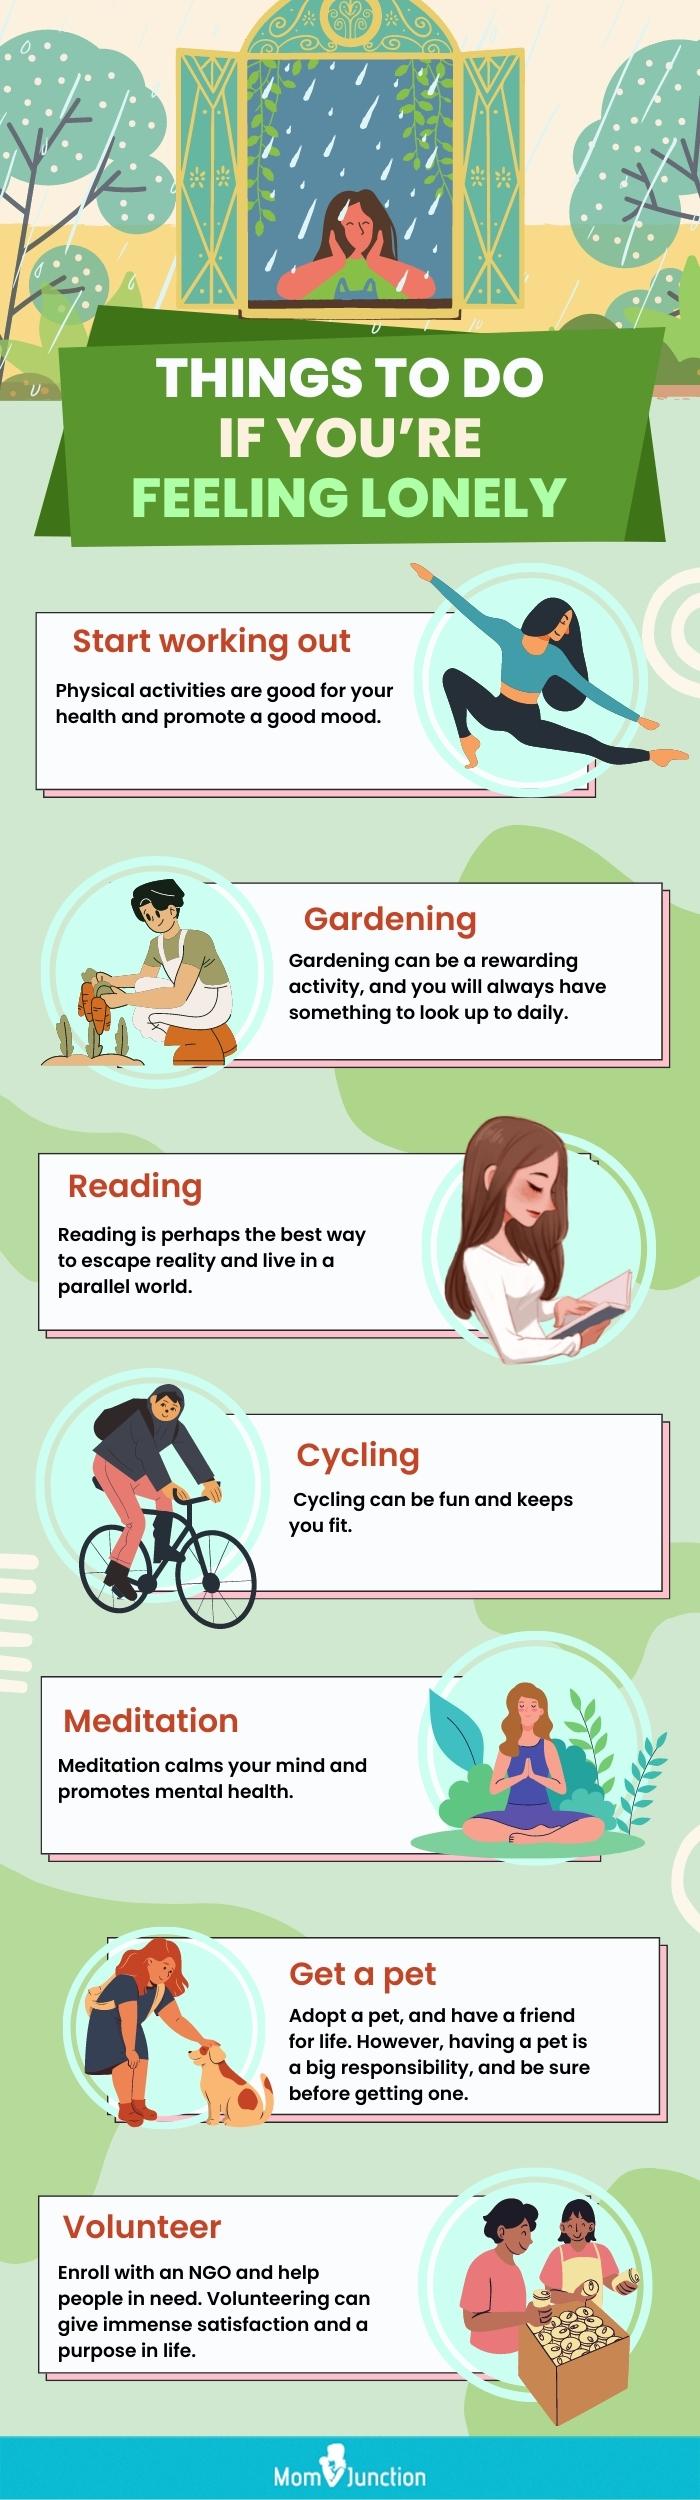 things to do if you’re feeling lonely (infographic)